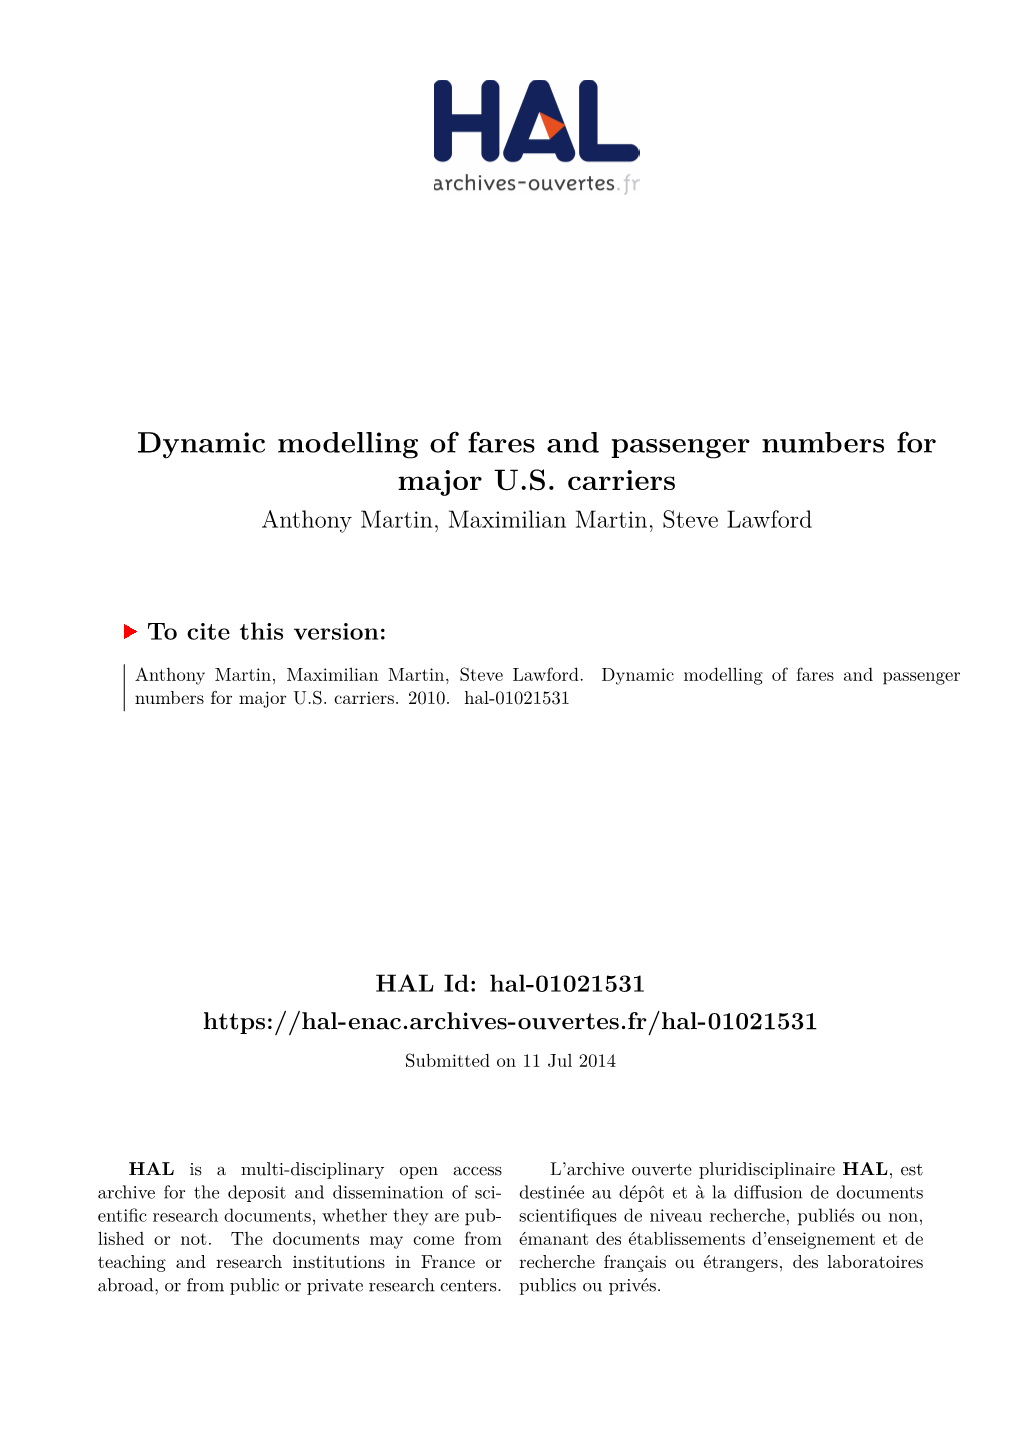 Dynamic Modelling of Fares and Passenger Numbers for Major U.S. Carriers Anthony Martin, Maximilian Martin, Steve Lawford